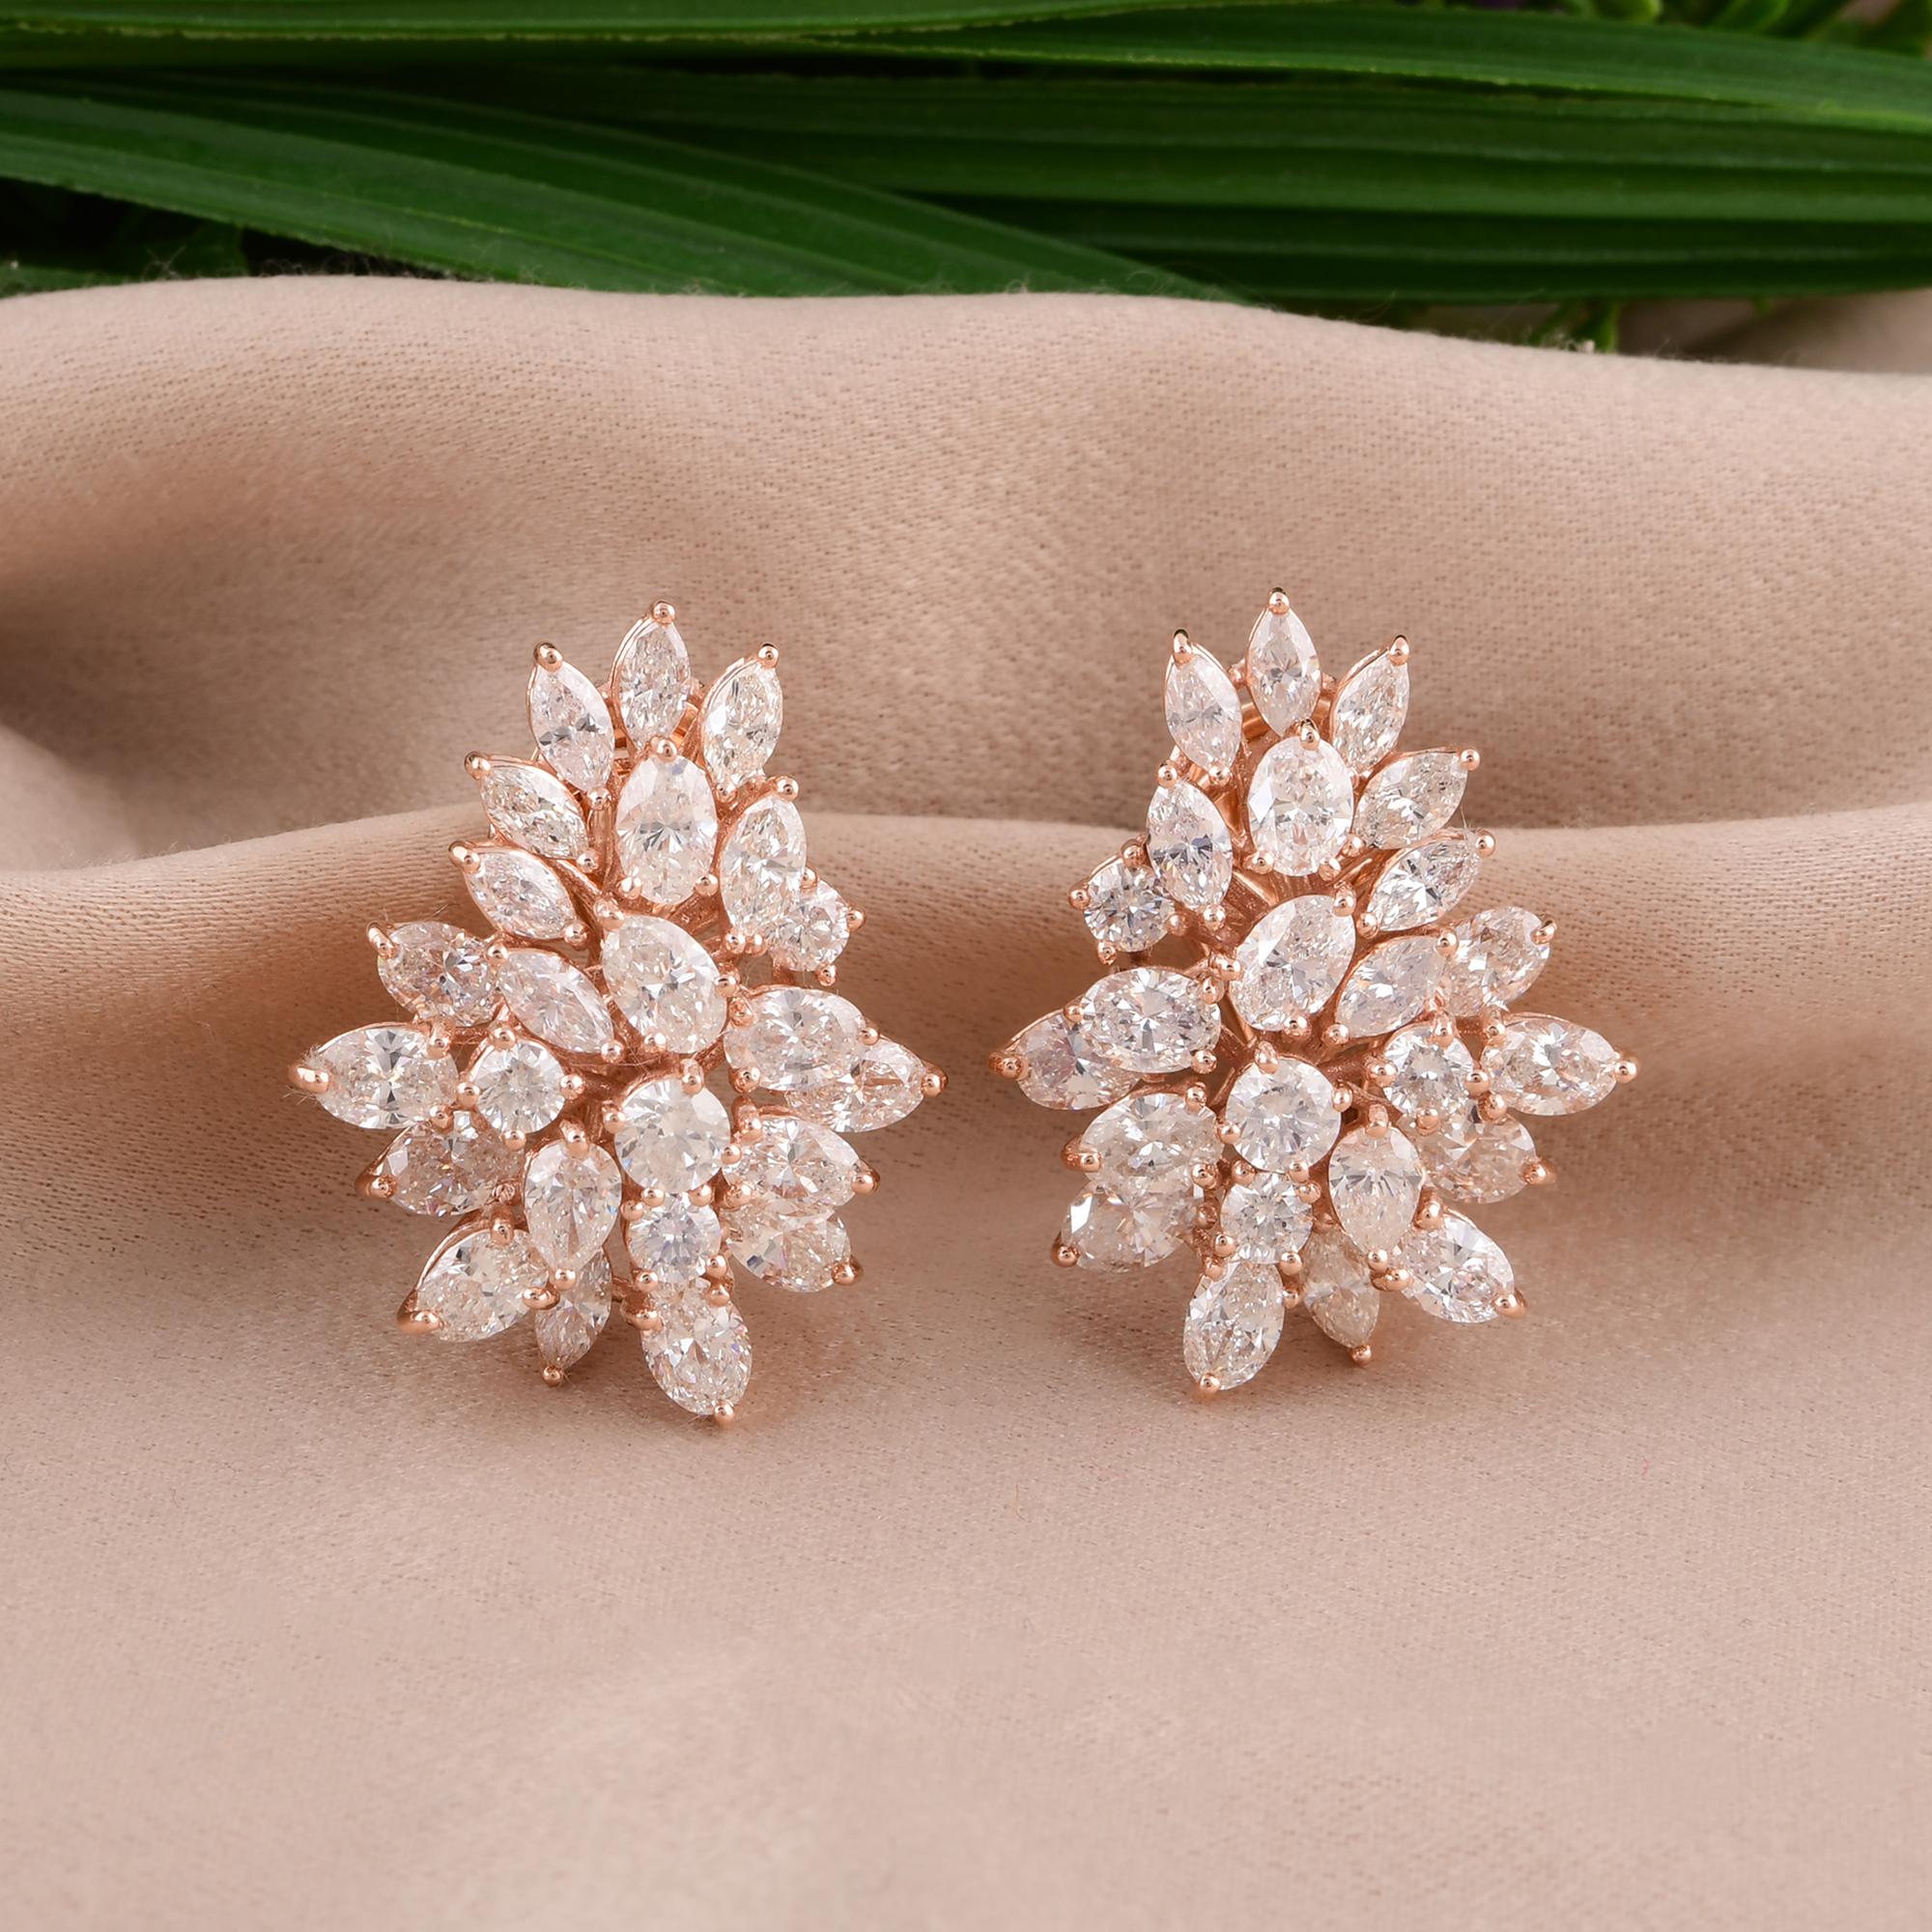 Indulge in the exquisite beauty of these Round, Marquise, and Oval Diamond Earrings, meticulously handmade in luxurious 14 karat rose gold. This stunning pair of fine jewelry is a harmonious blend of classic elegance and modern sophistication,